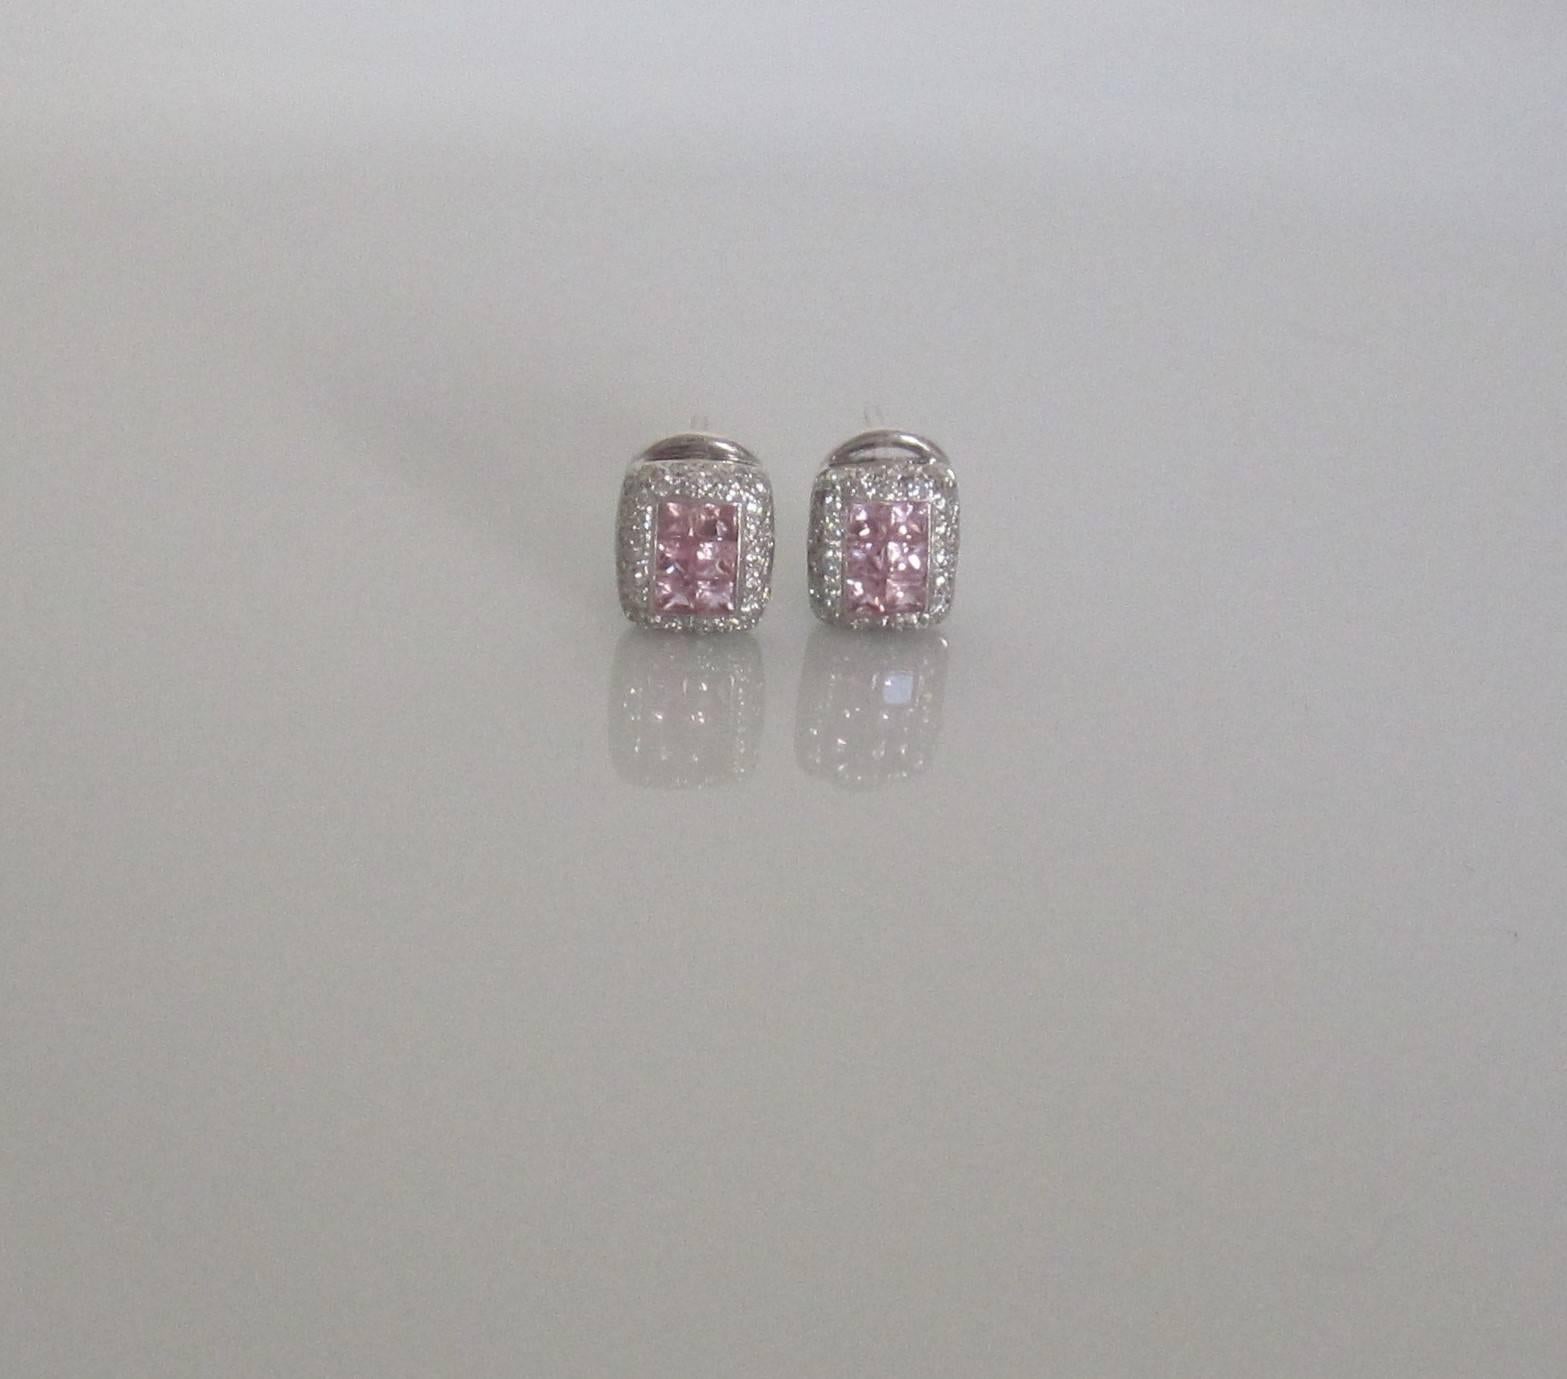 A beautiful and sparkling pair of earrings comprised of 18-karat white gold, genuine diamonds, and square pink sapphires. Each earring, diamonds are set 'pave' around 6 square cut pink sapphires, all in an 18-karat white gold rectangular setting.